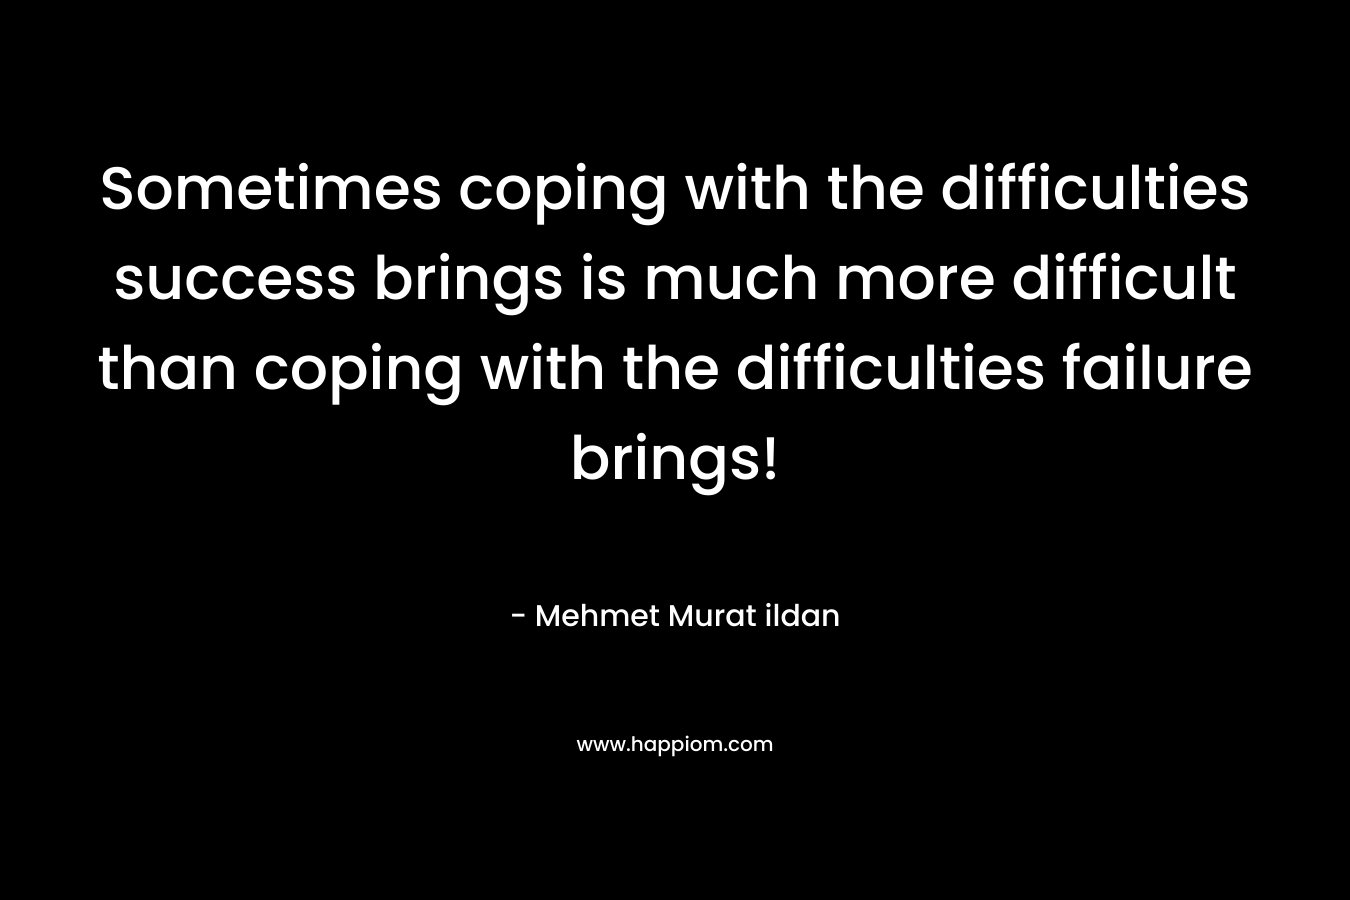 Sometimes coping with the difficulties success brings is much more difficult than coping with the difficulties failure brings! – Mehmet Murat ildan